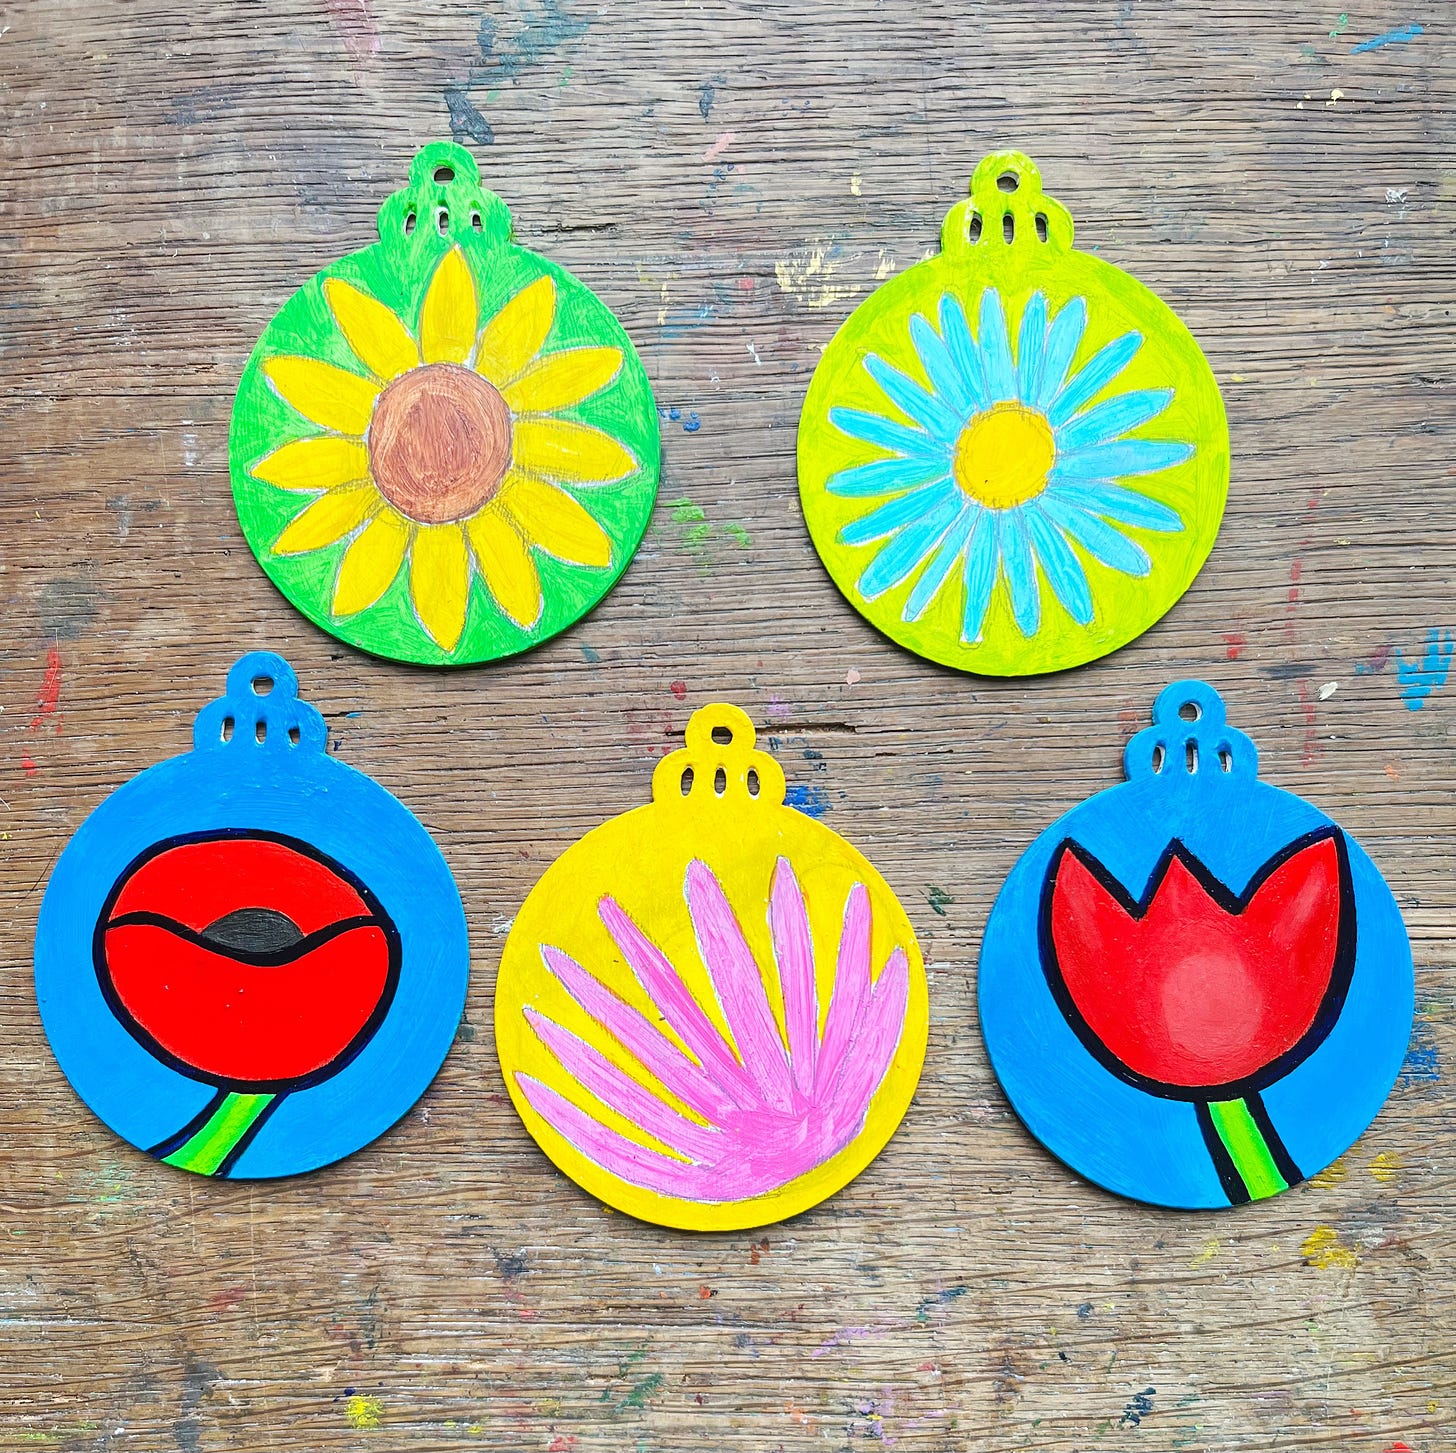 Five flowery Christmas ornaments